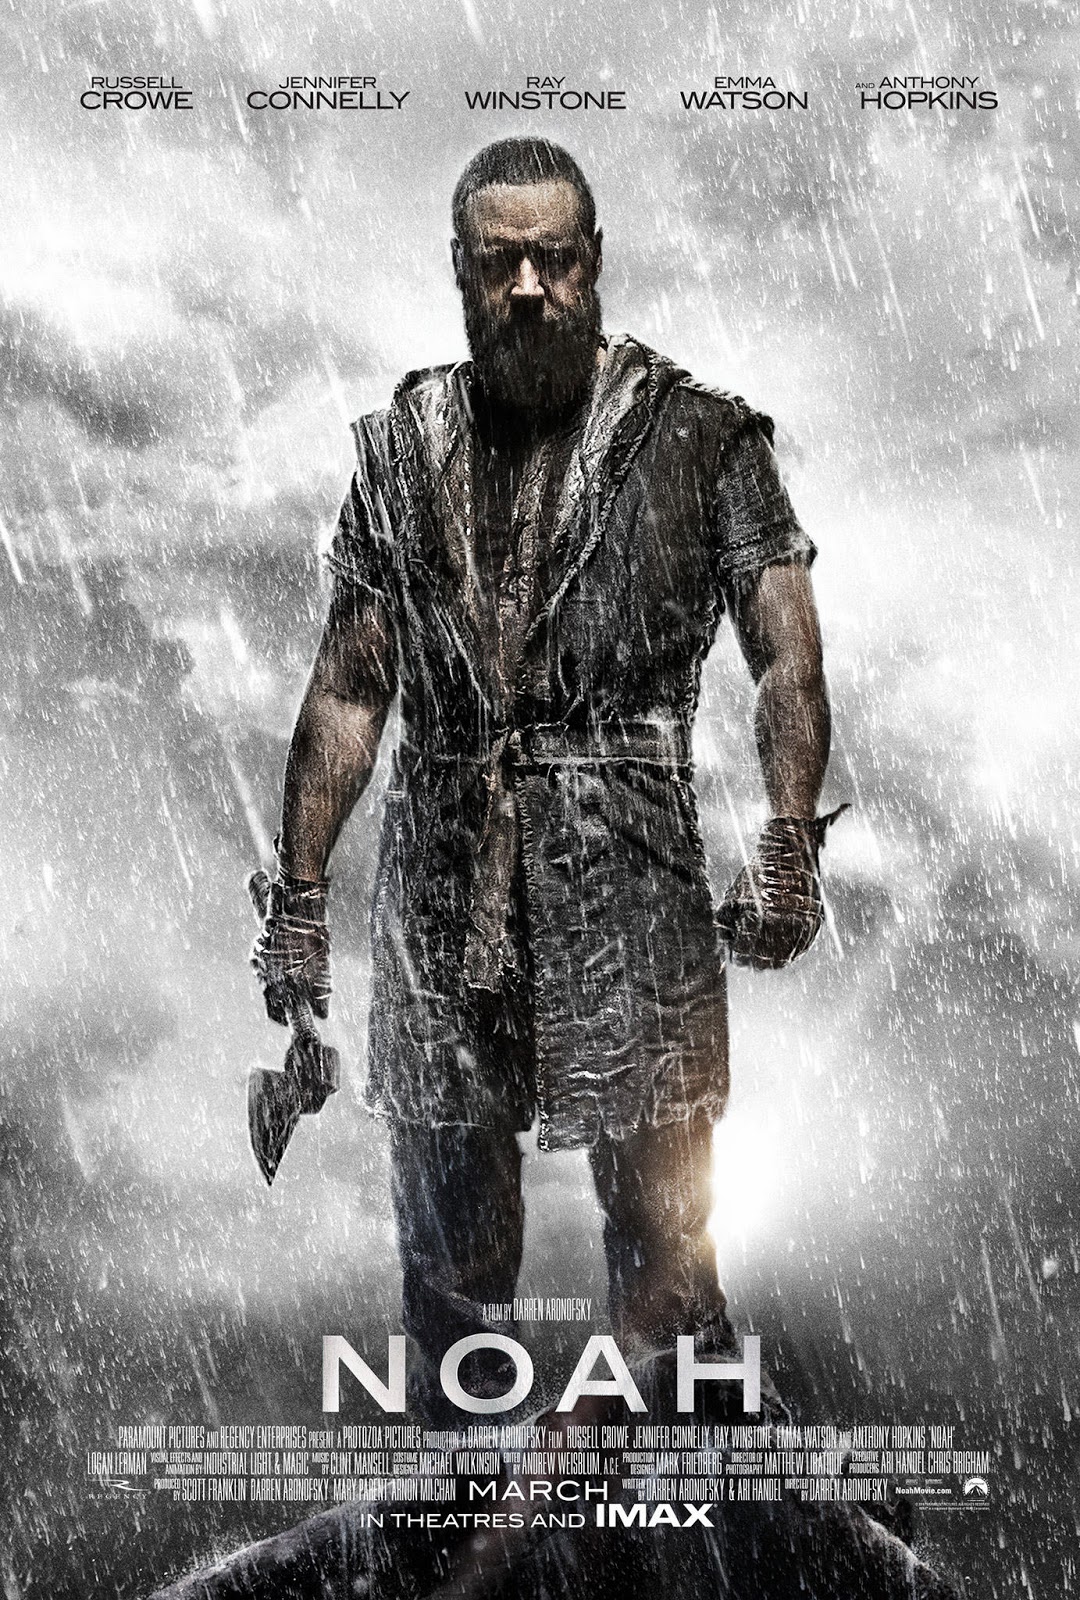 Pictures of NOAH 2014 The Movie Poster